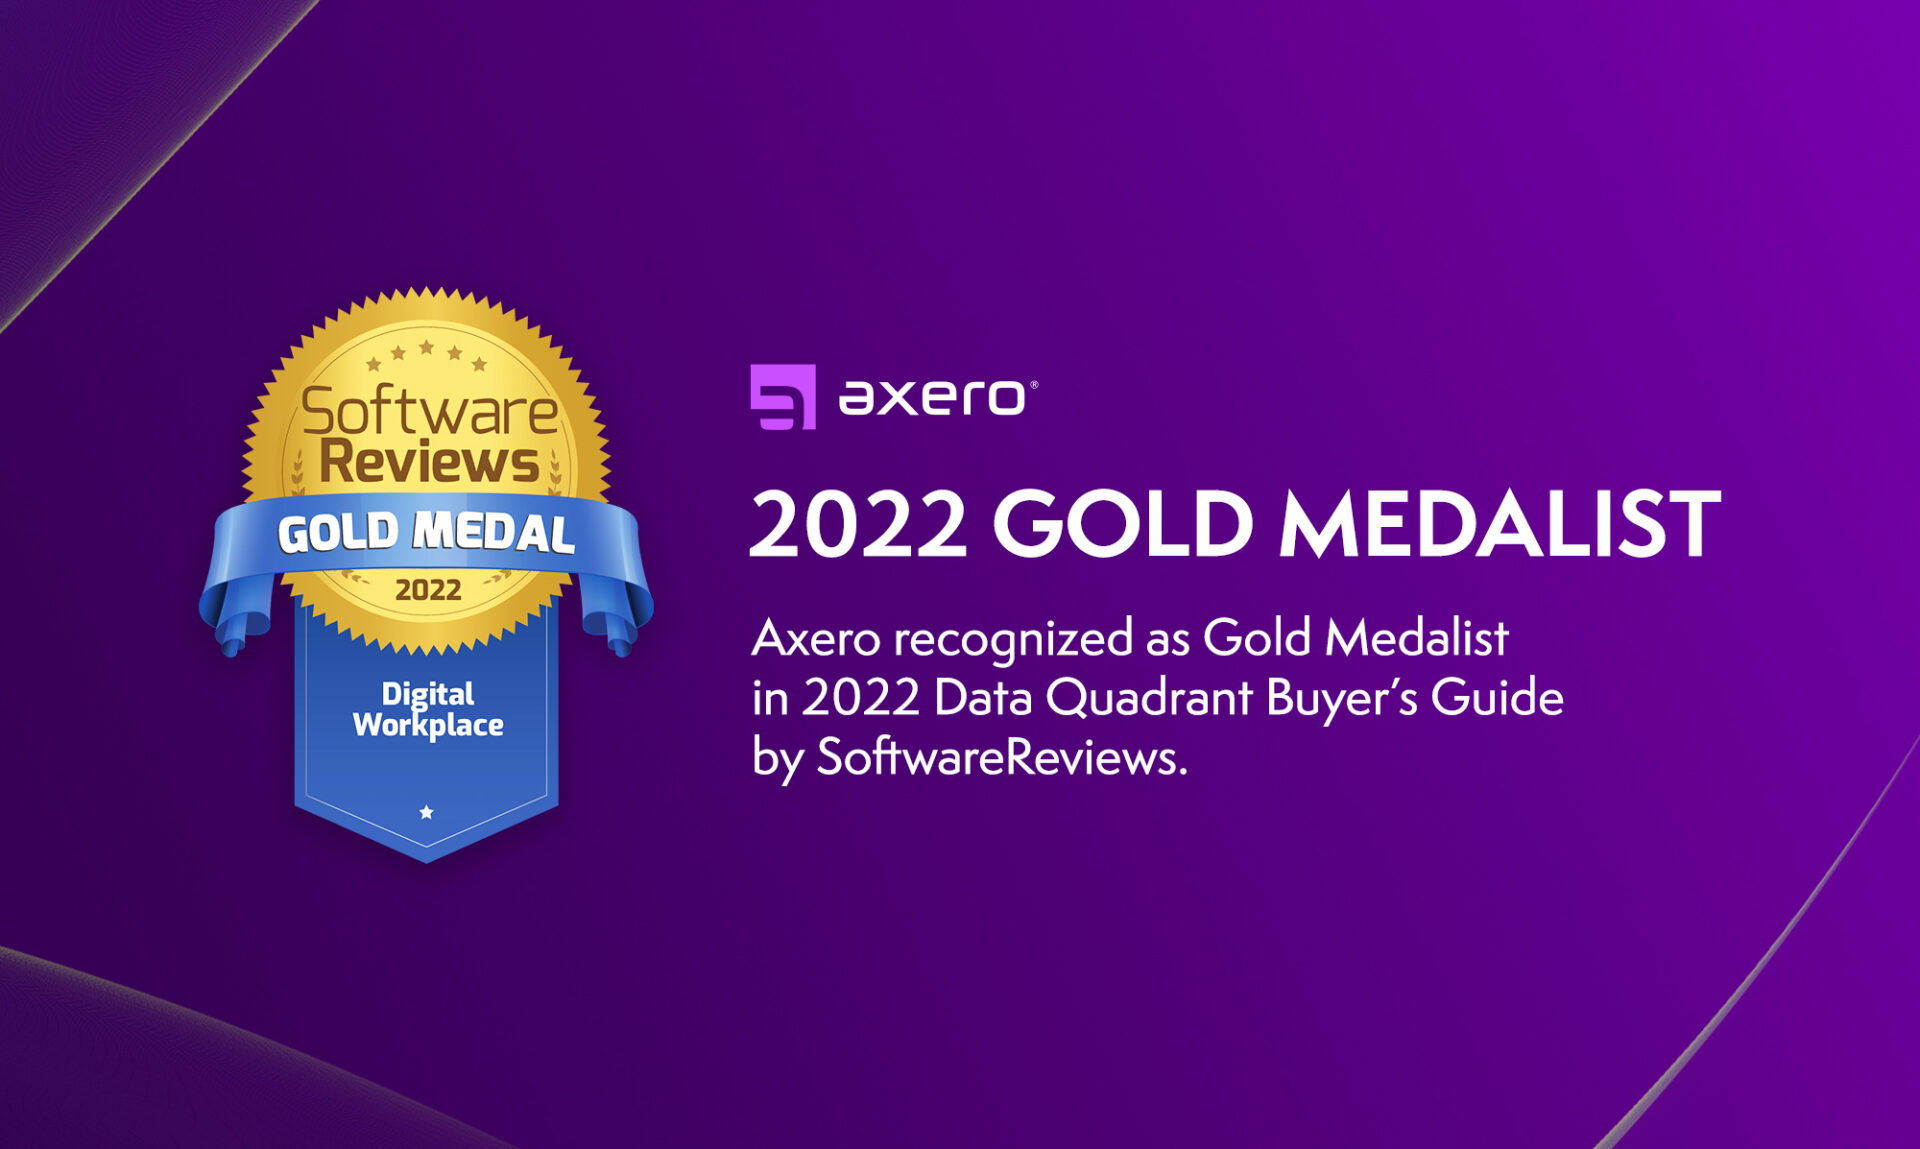 Axero Recognized as Gold Medalist in 2022 Data Quadrant Buyer’s Guide by SoftwareReviews